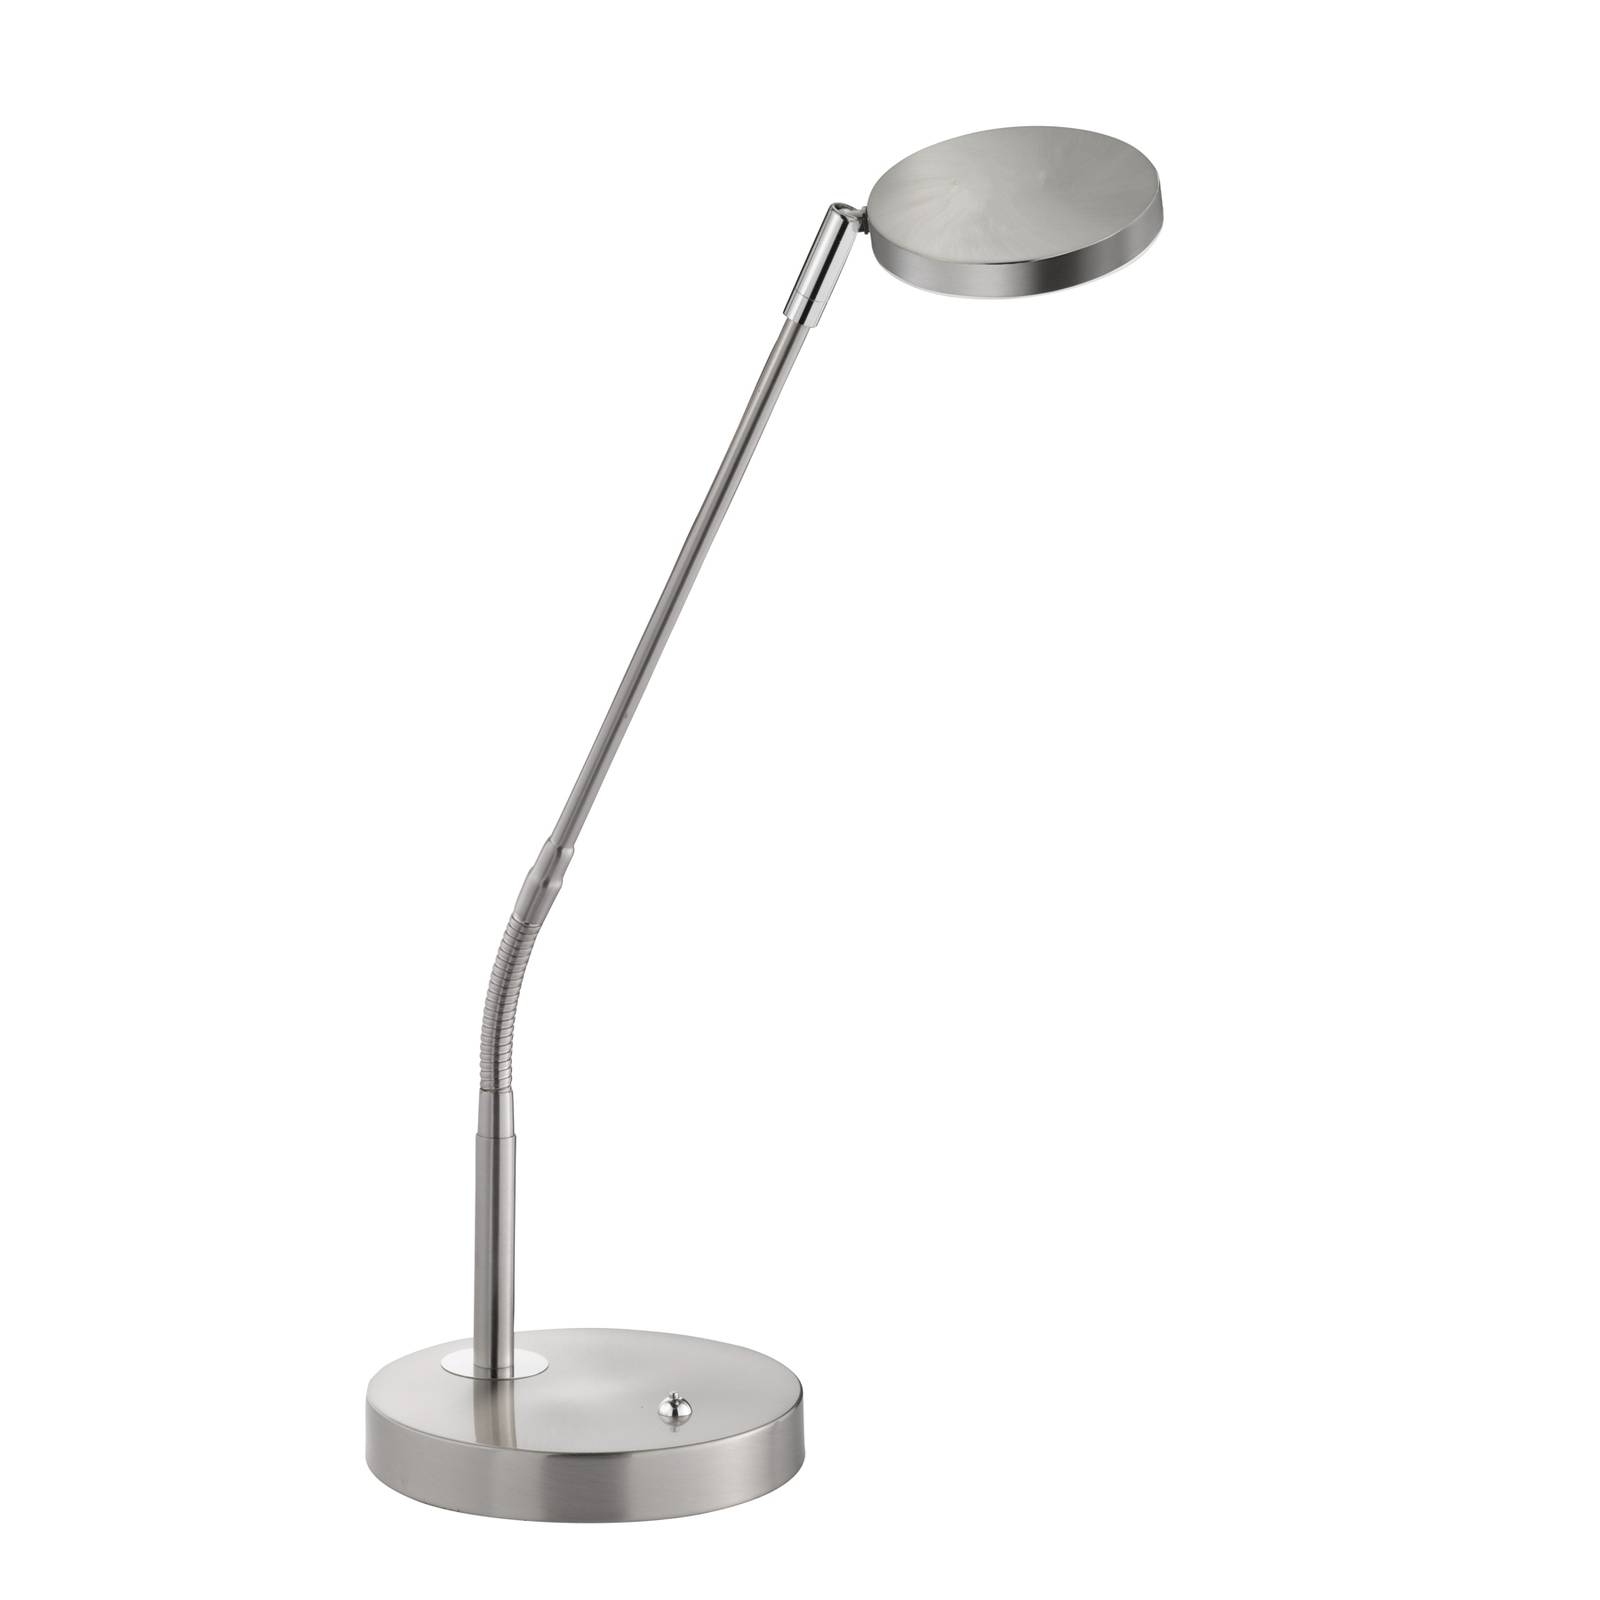 Image of Lampe à poser LED Lunia, dimmable, nickel mat 4052231501555